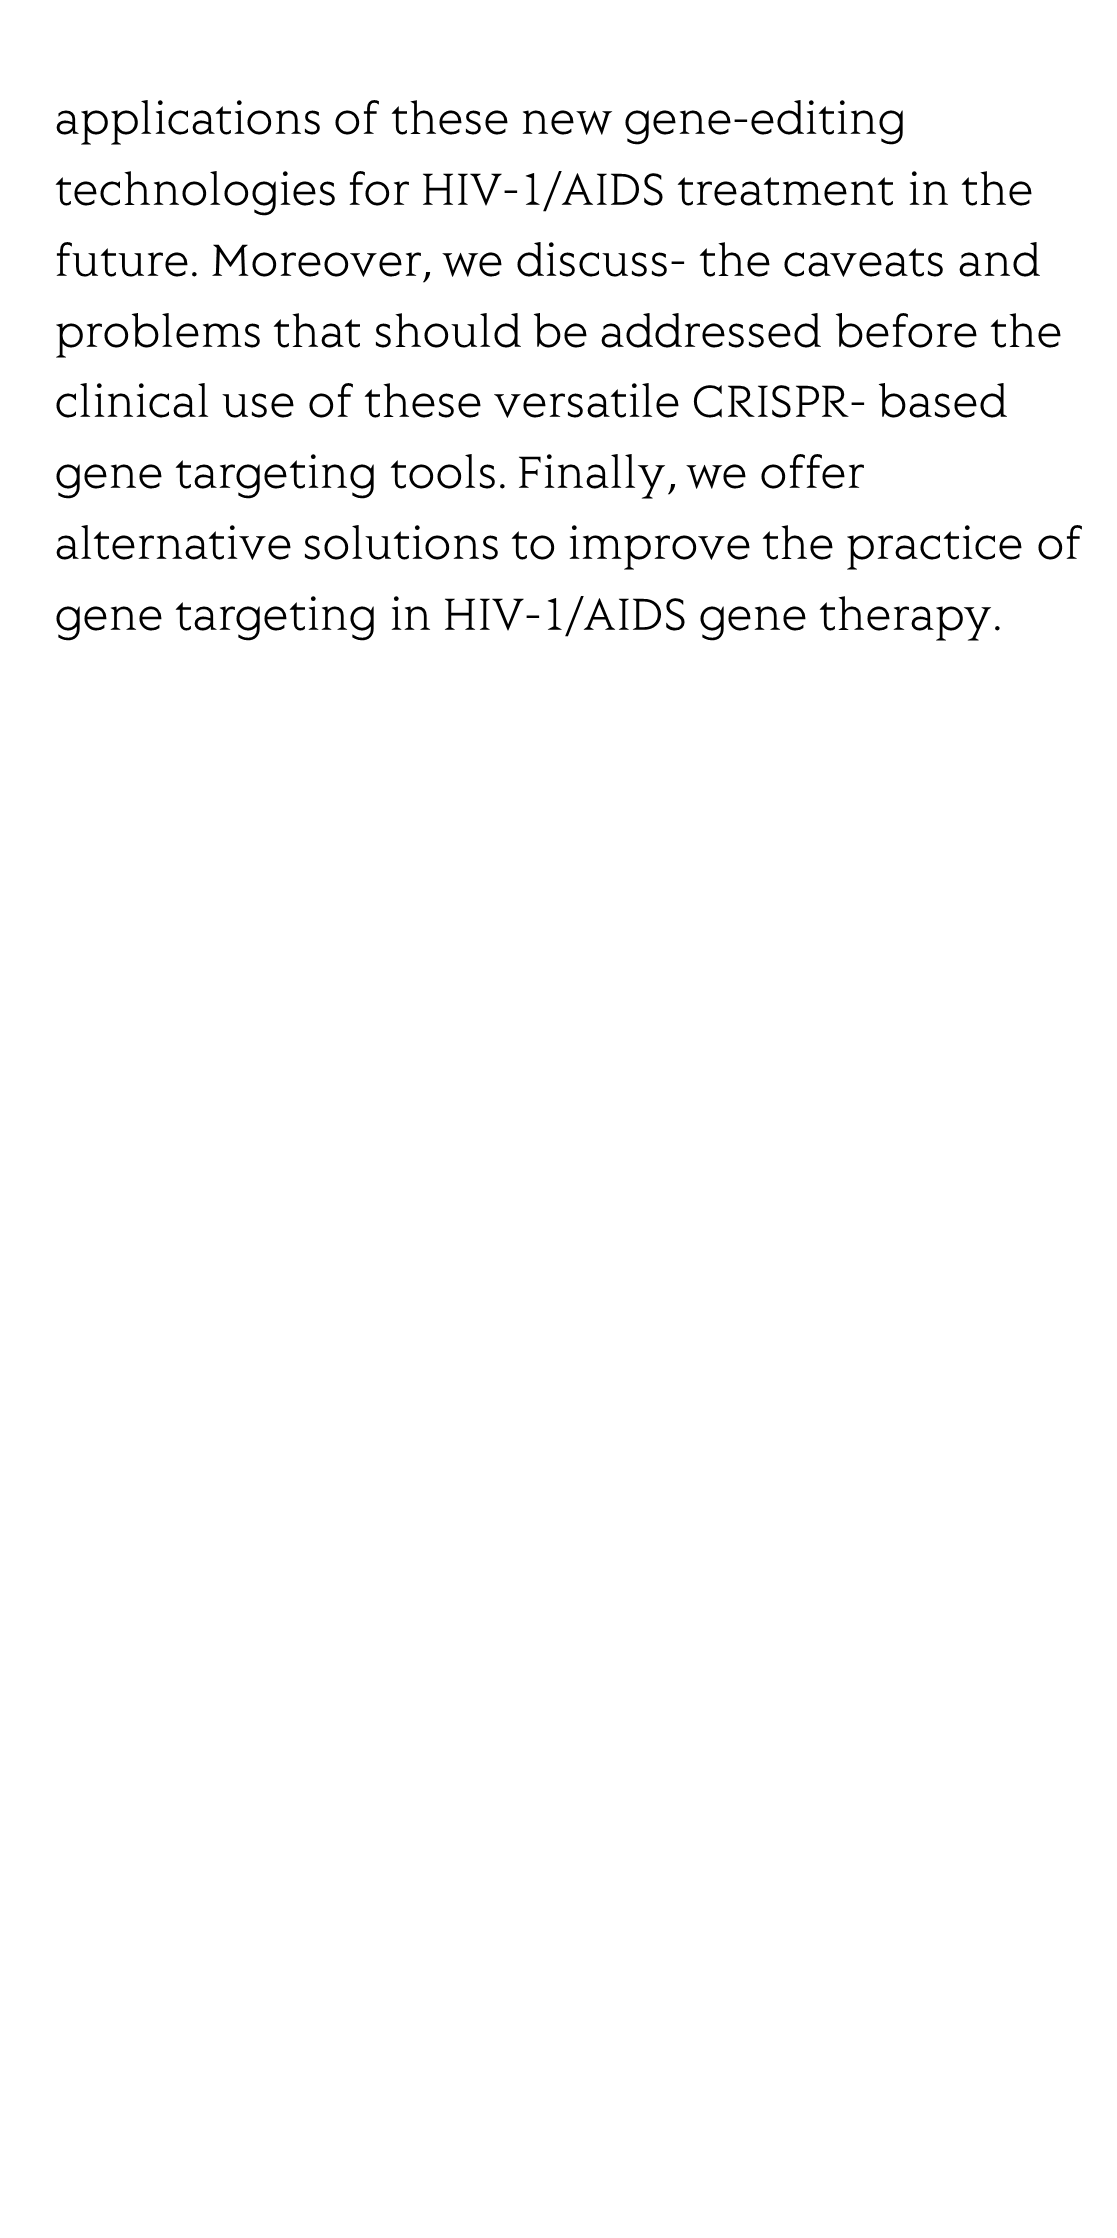 Updates on CRISPR-based gene editing in HIV-1/AIDS therapy_3